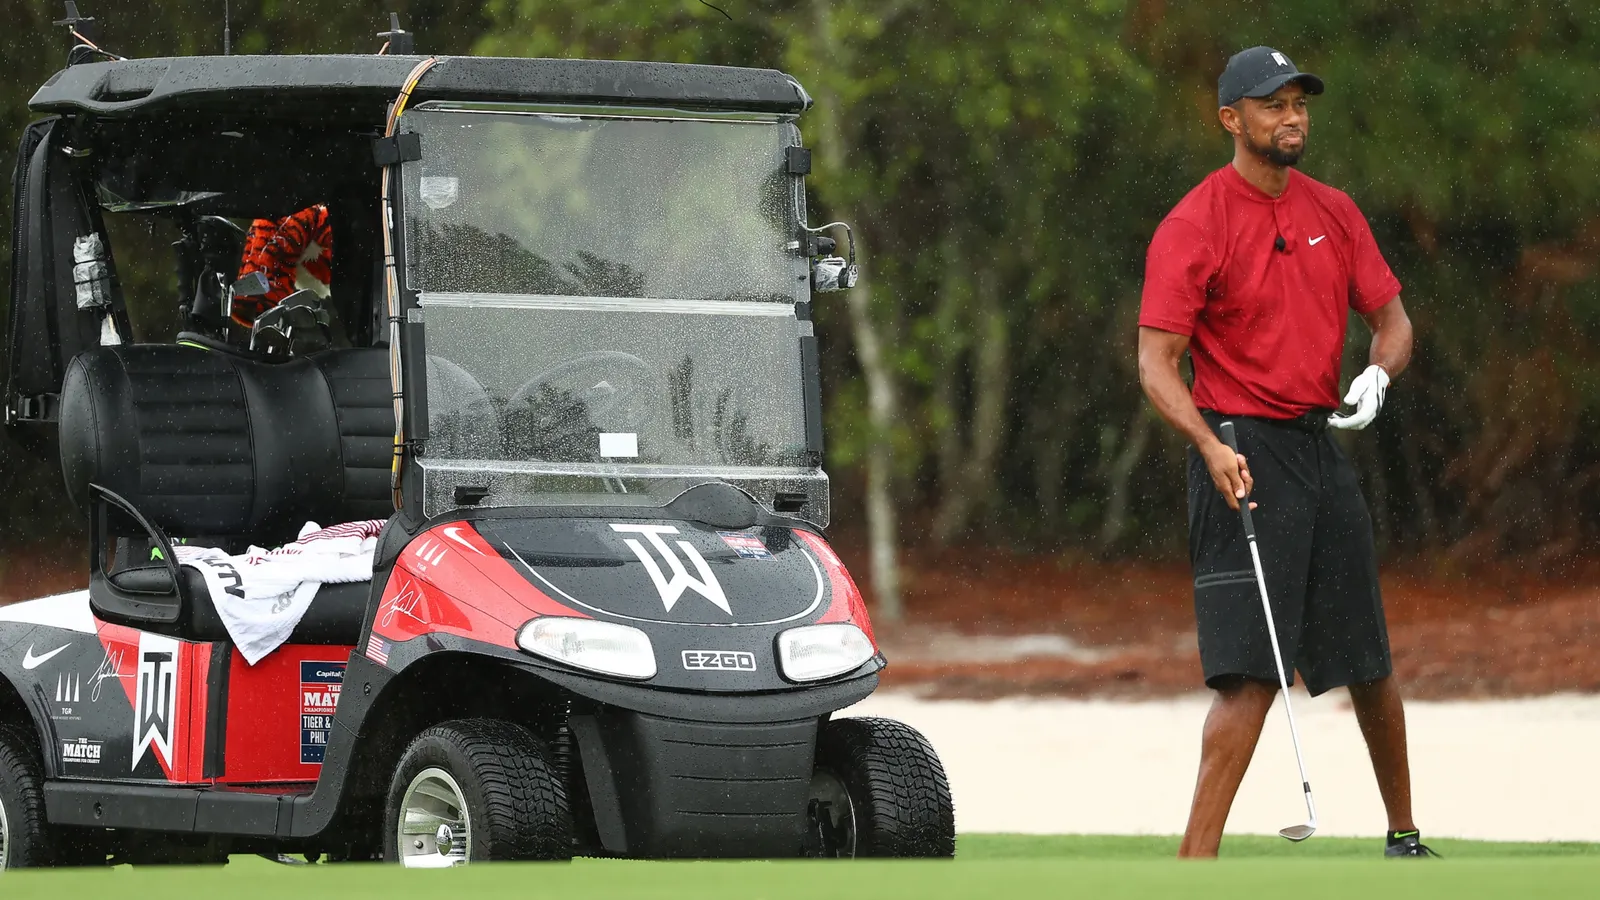 Stage set for Tiger's latest comeback in The Match